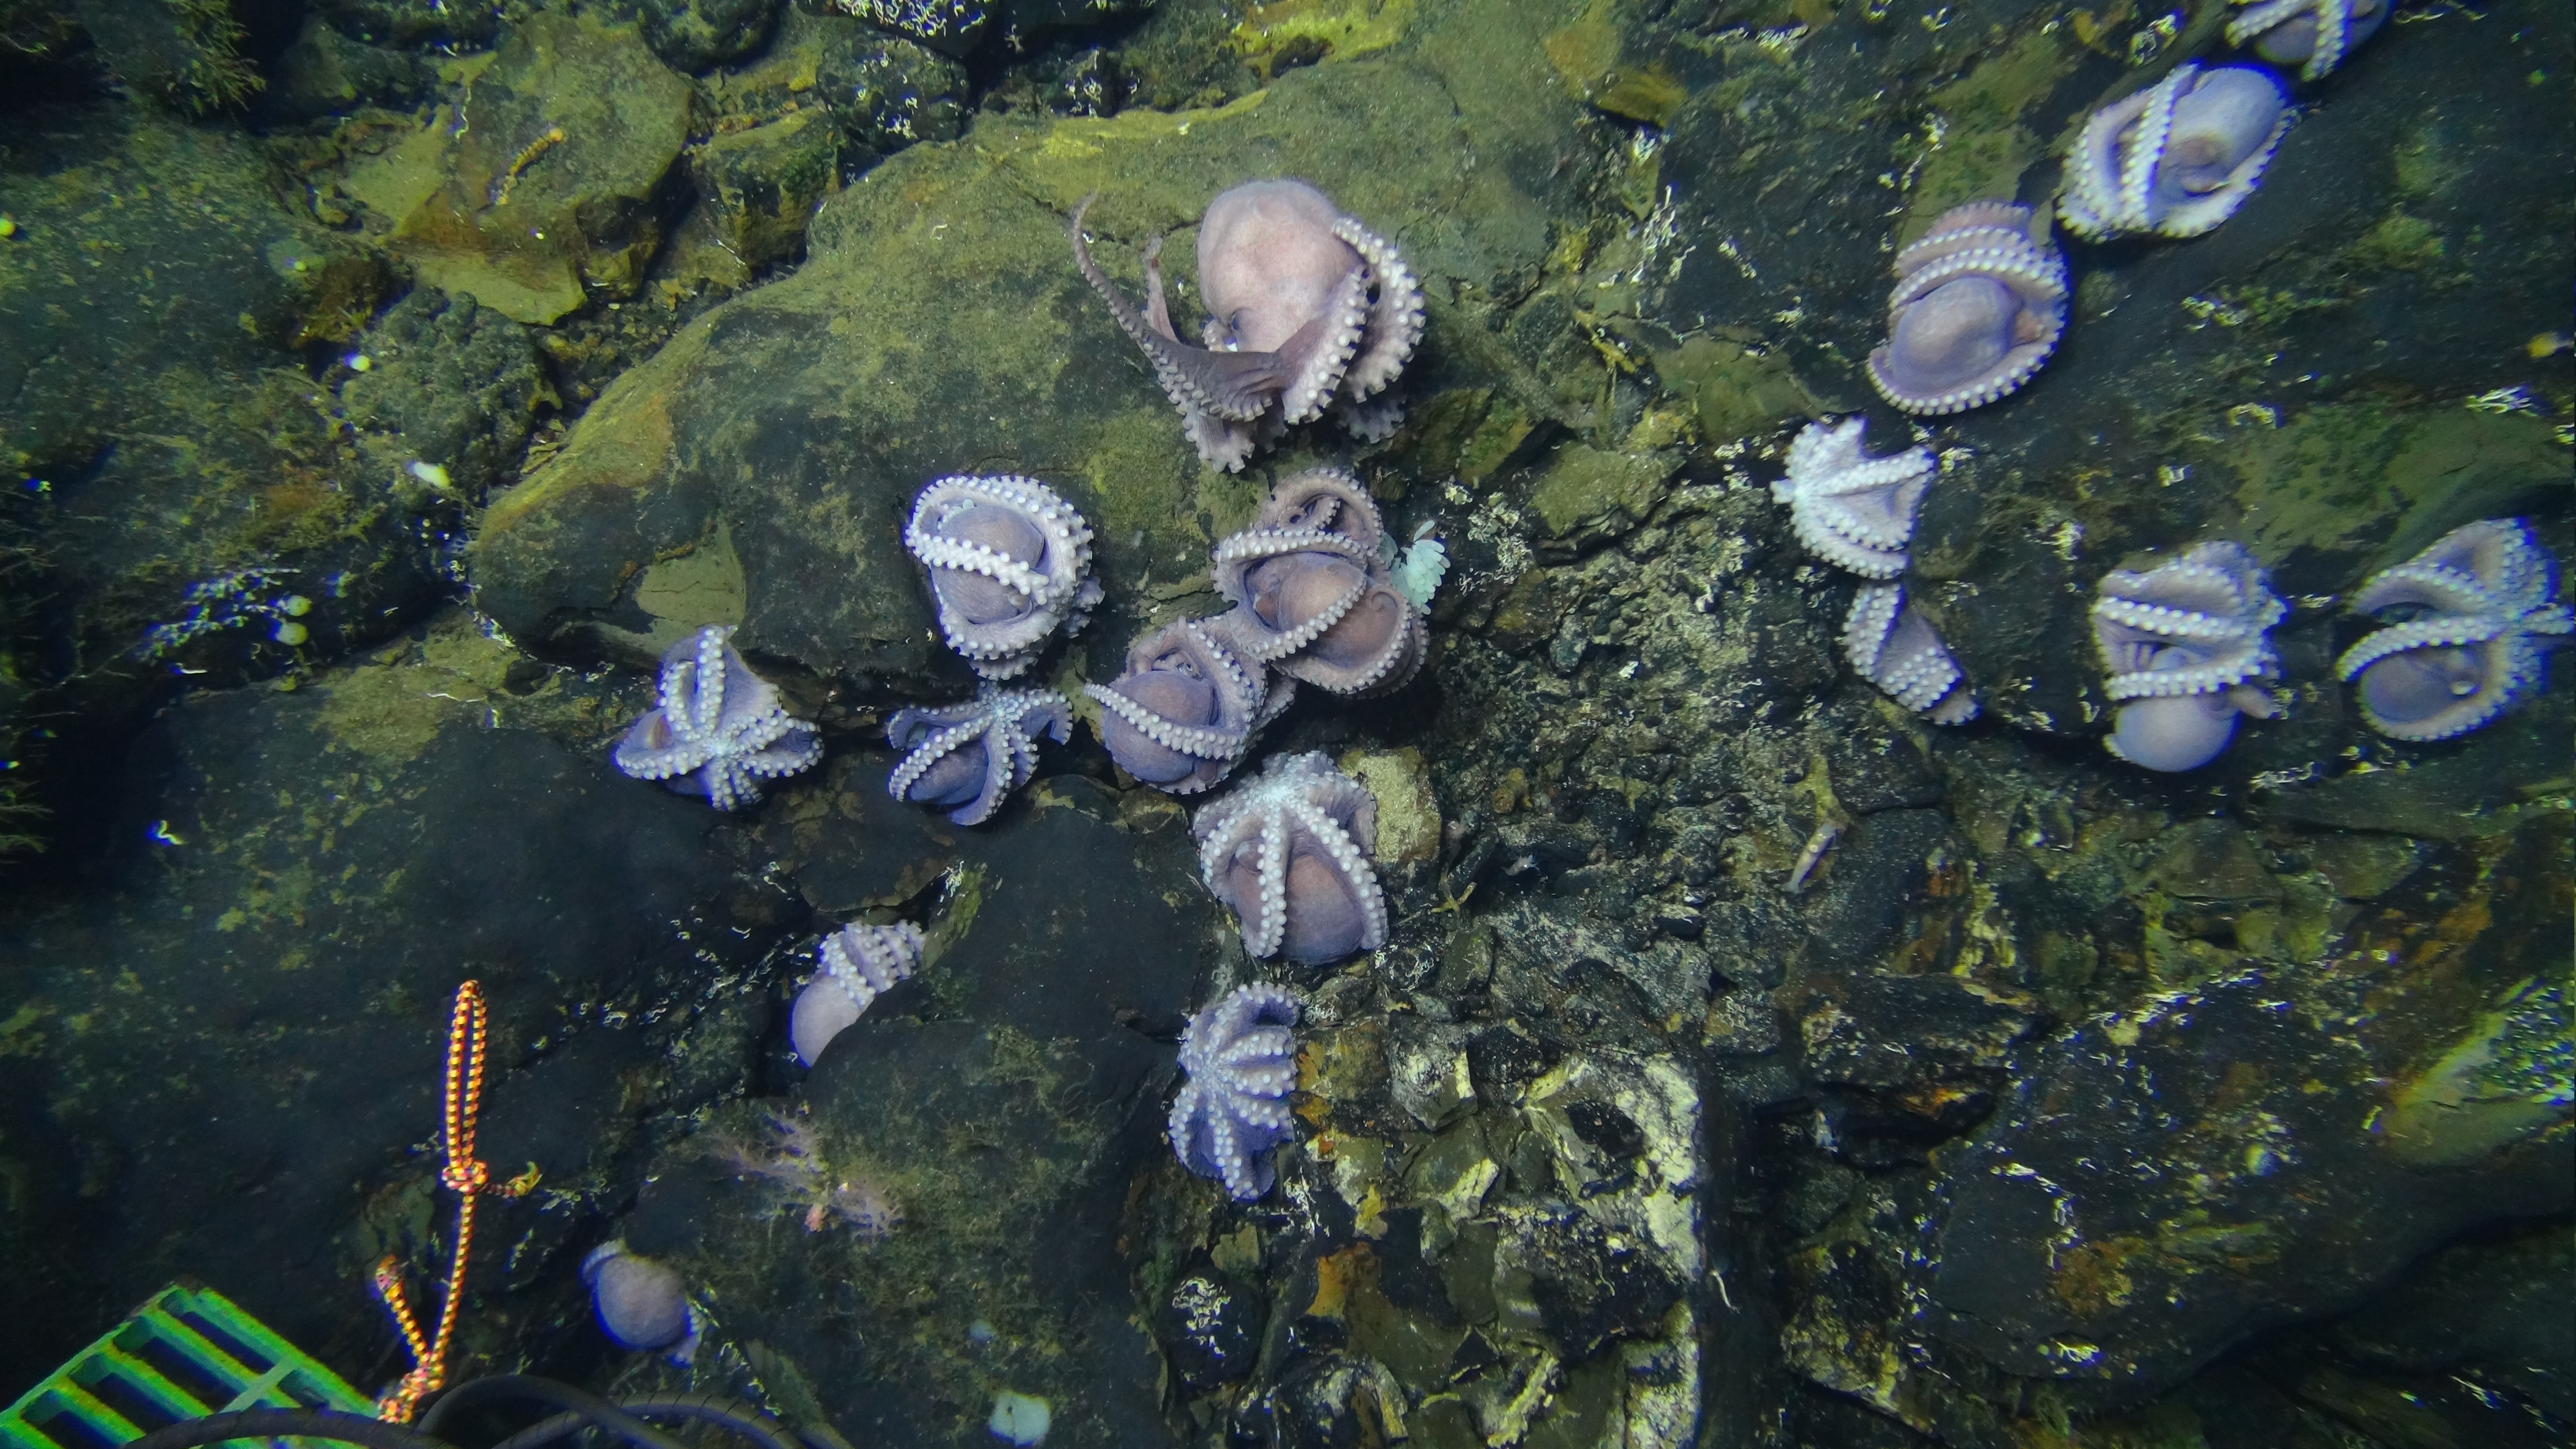 17 small octopuses sitting on a rock at the bottom of the ocean, brooding with their eggs, off the coast of Costa Rica.